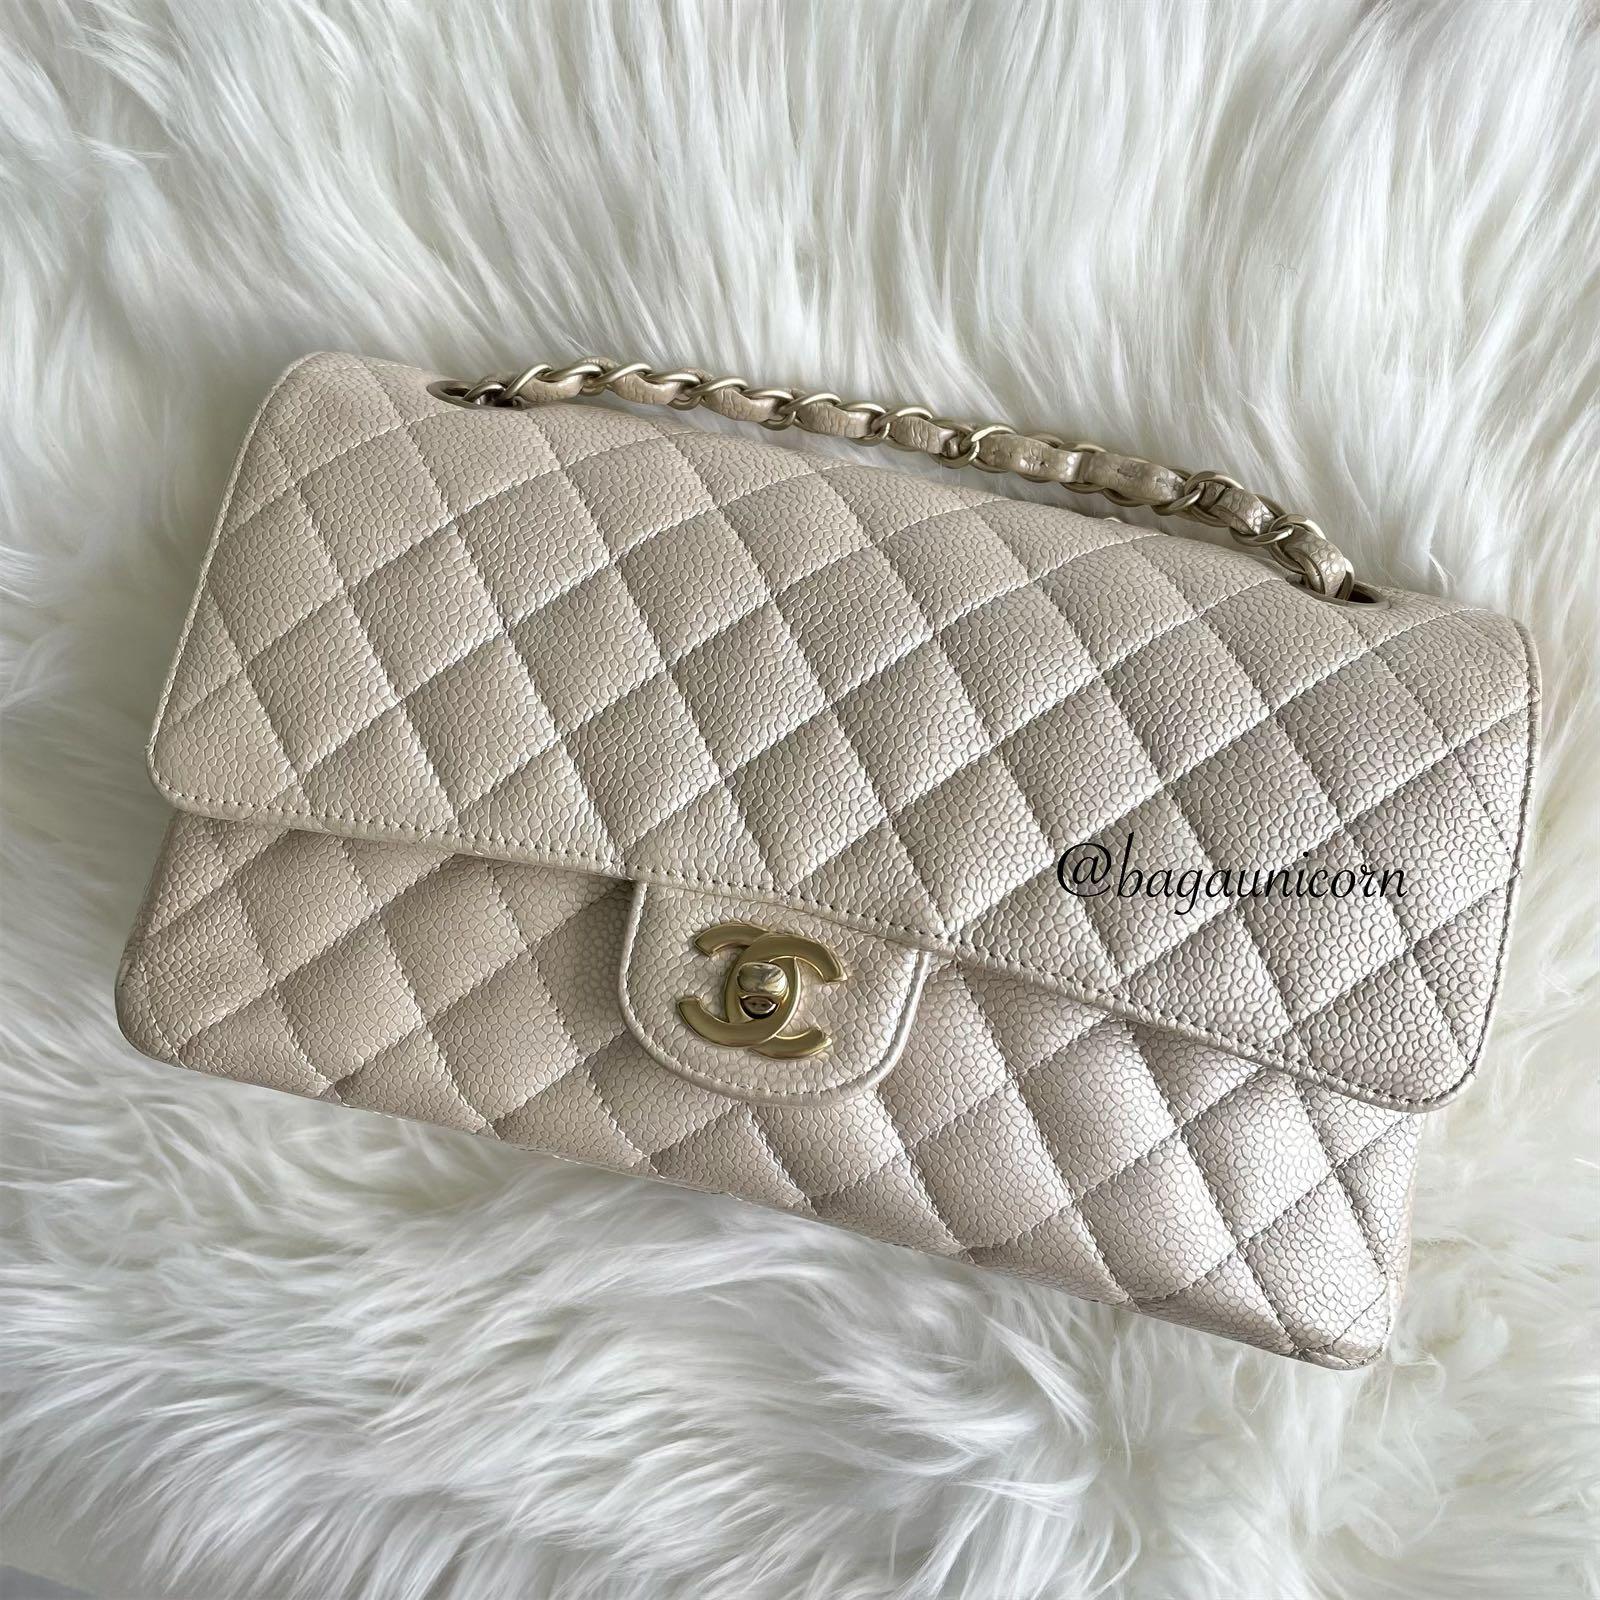 (Full set) Chanel pearly beige classic double flap bag